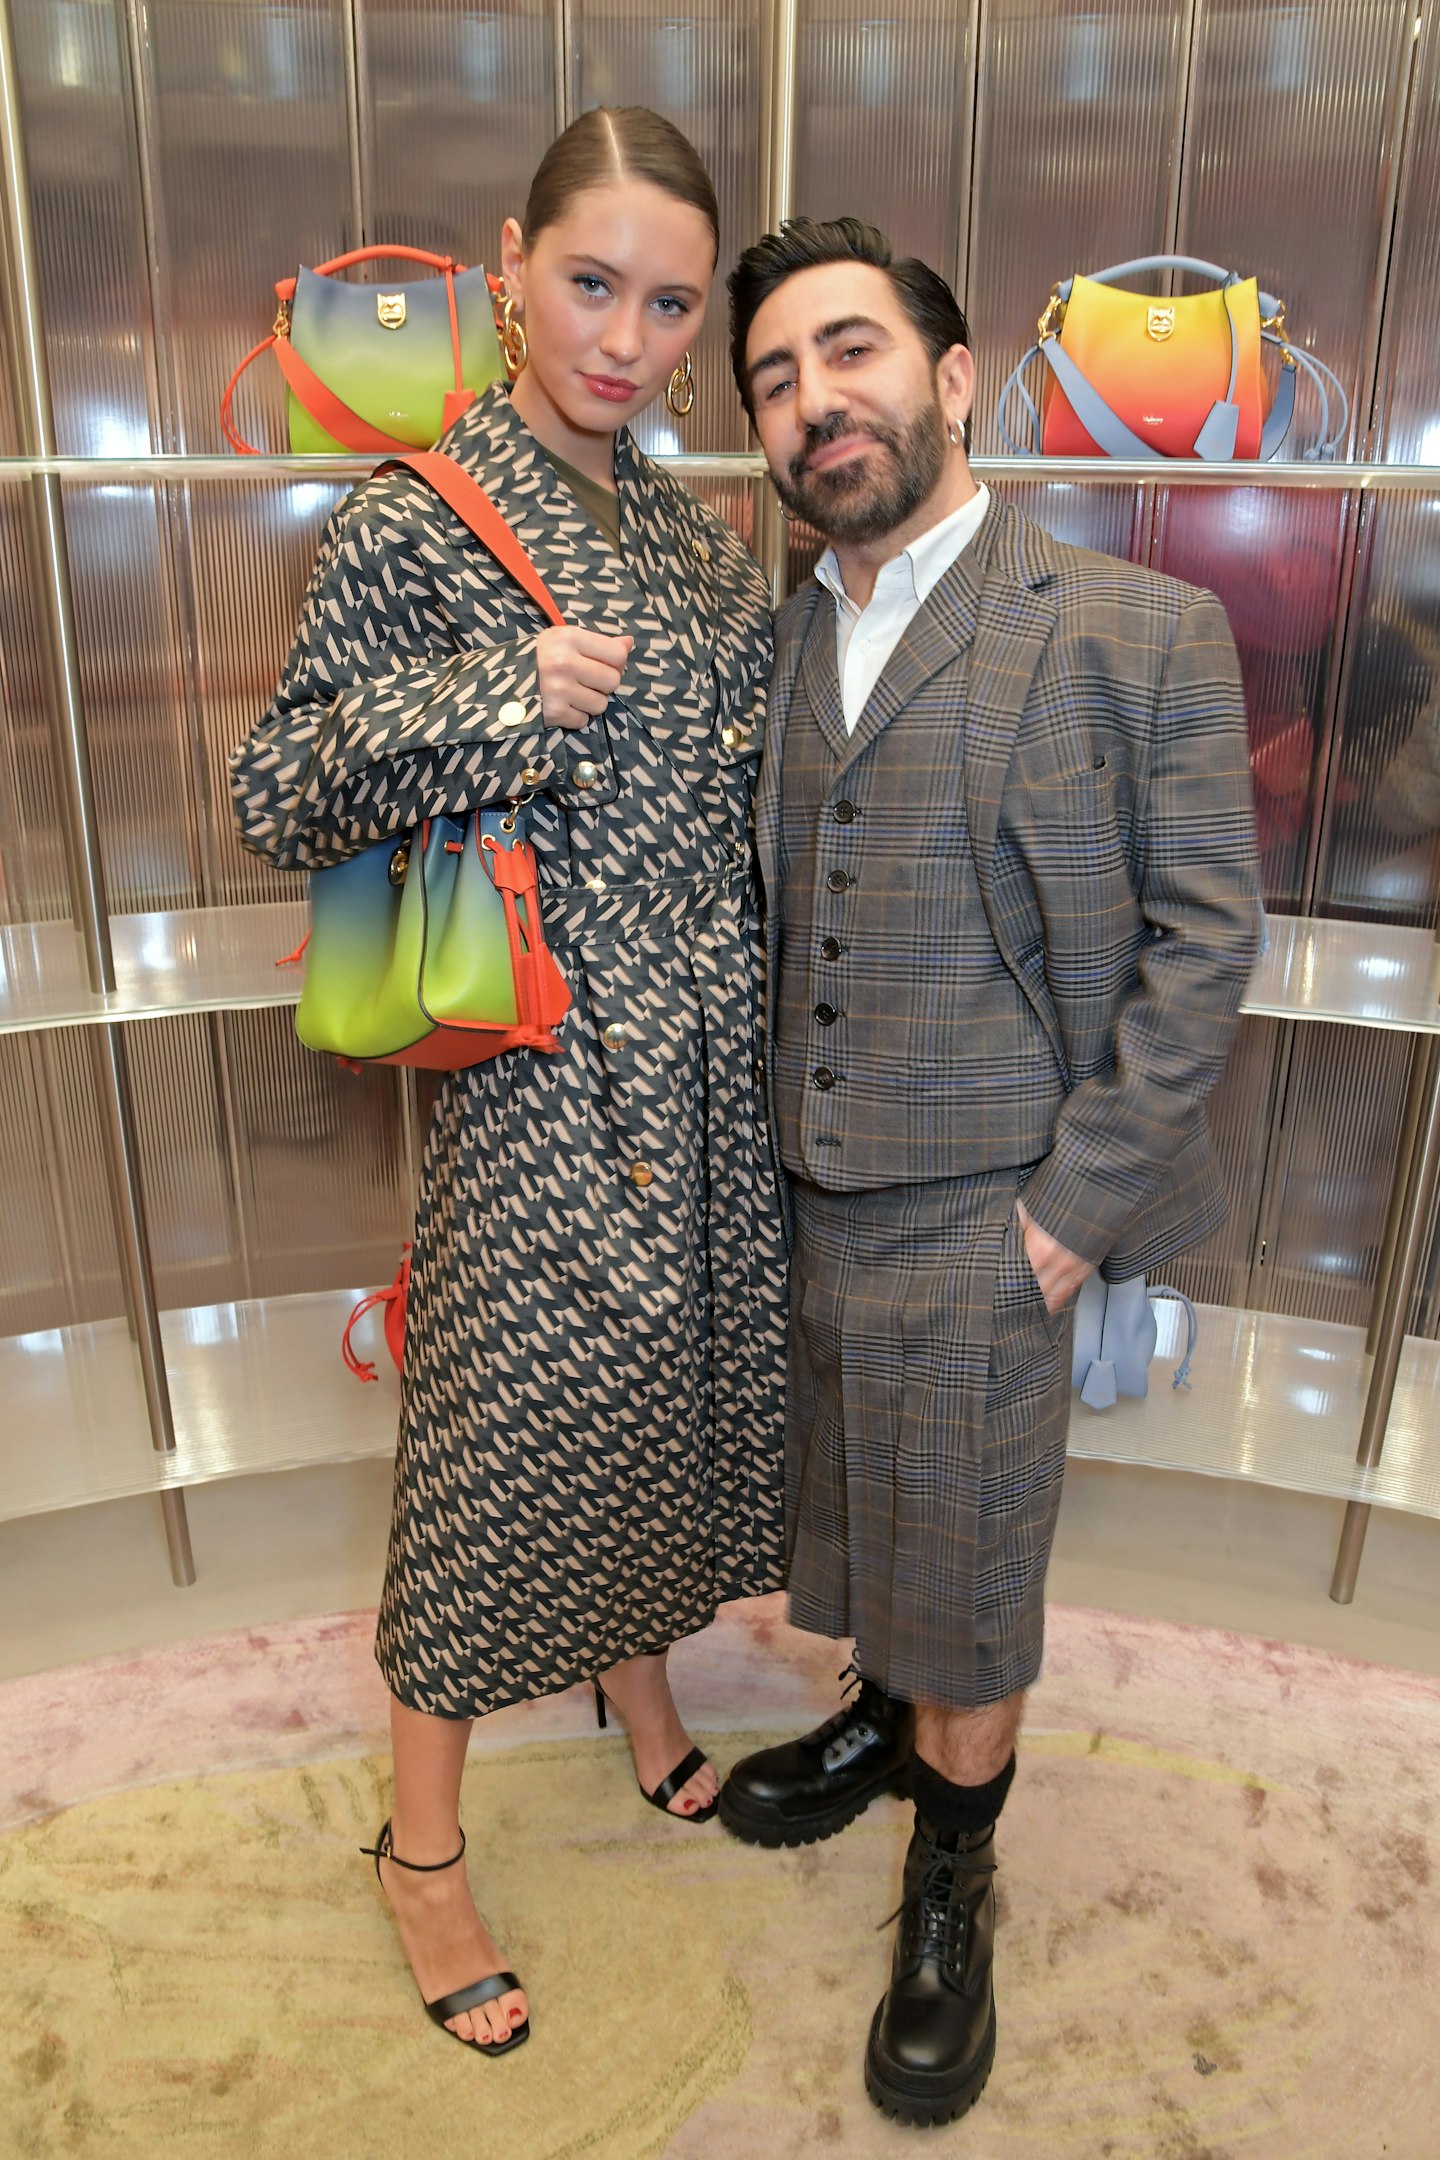 Mulberry's new designer Johnny Coca on why he's reinvented the